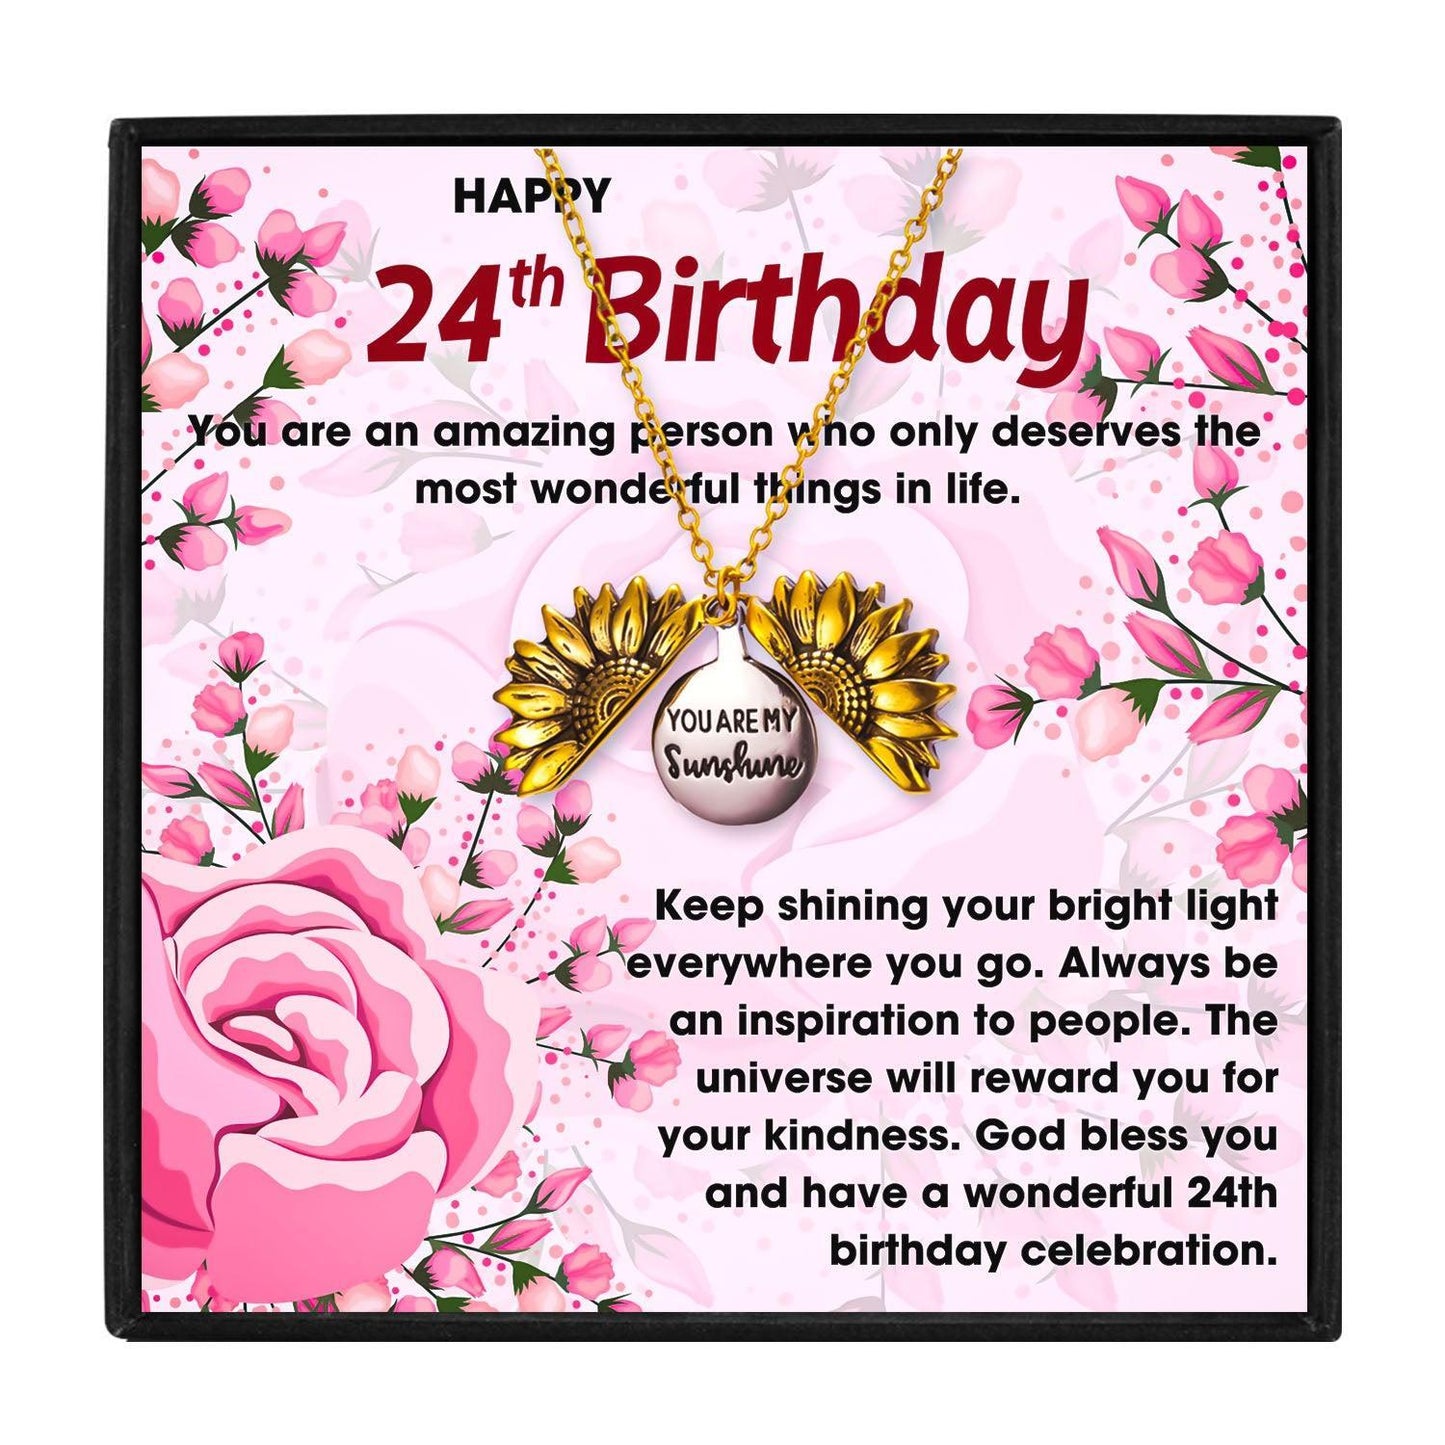 24th Birthday Gift Ideas For Her You Love in 2023 | 24th Birthday Gift Ideas For Her You Love - undefined | 24 birthday gift, 24th birthday gift ideas, 24th birthday ideas for her | From Hunny Life | hunnylife.com